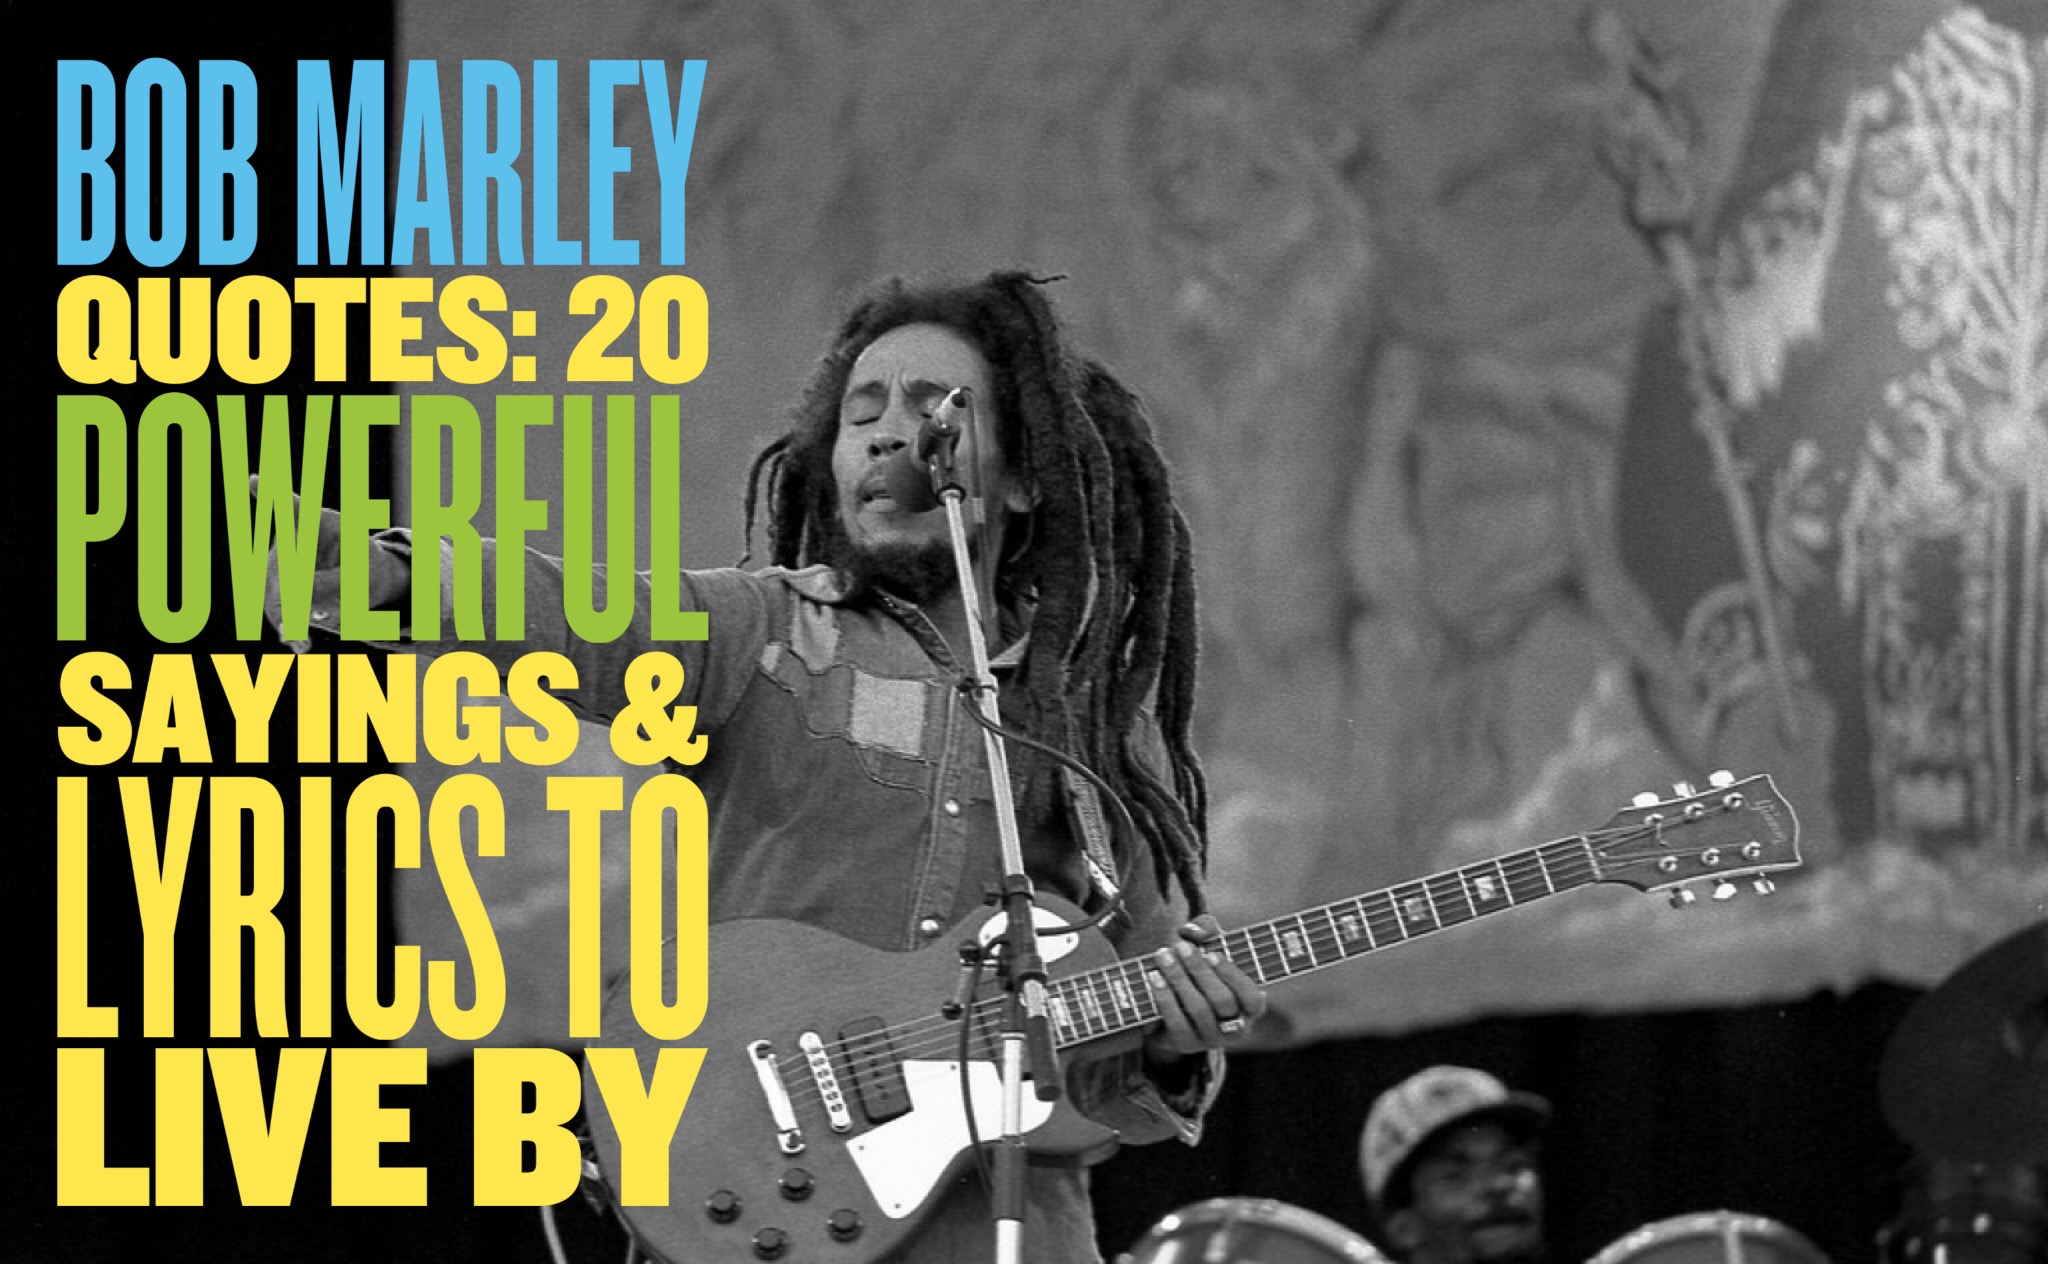 Bob Marley Quotes: 20 Powerful Sayings & Lyrics To Live By2048 x 1264